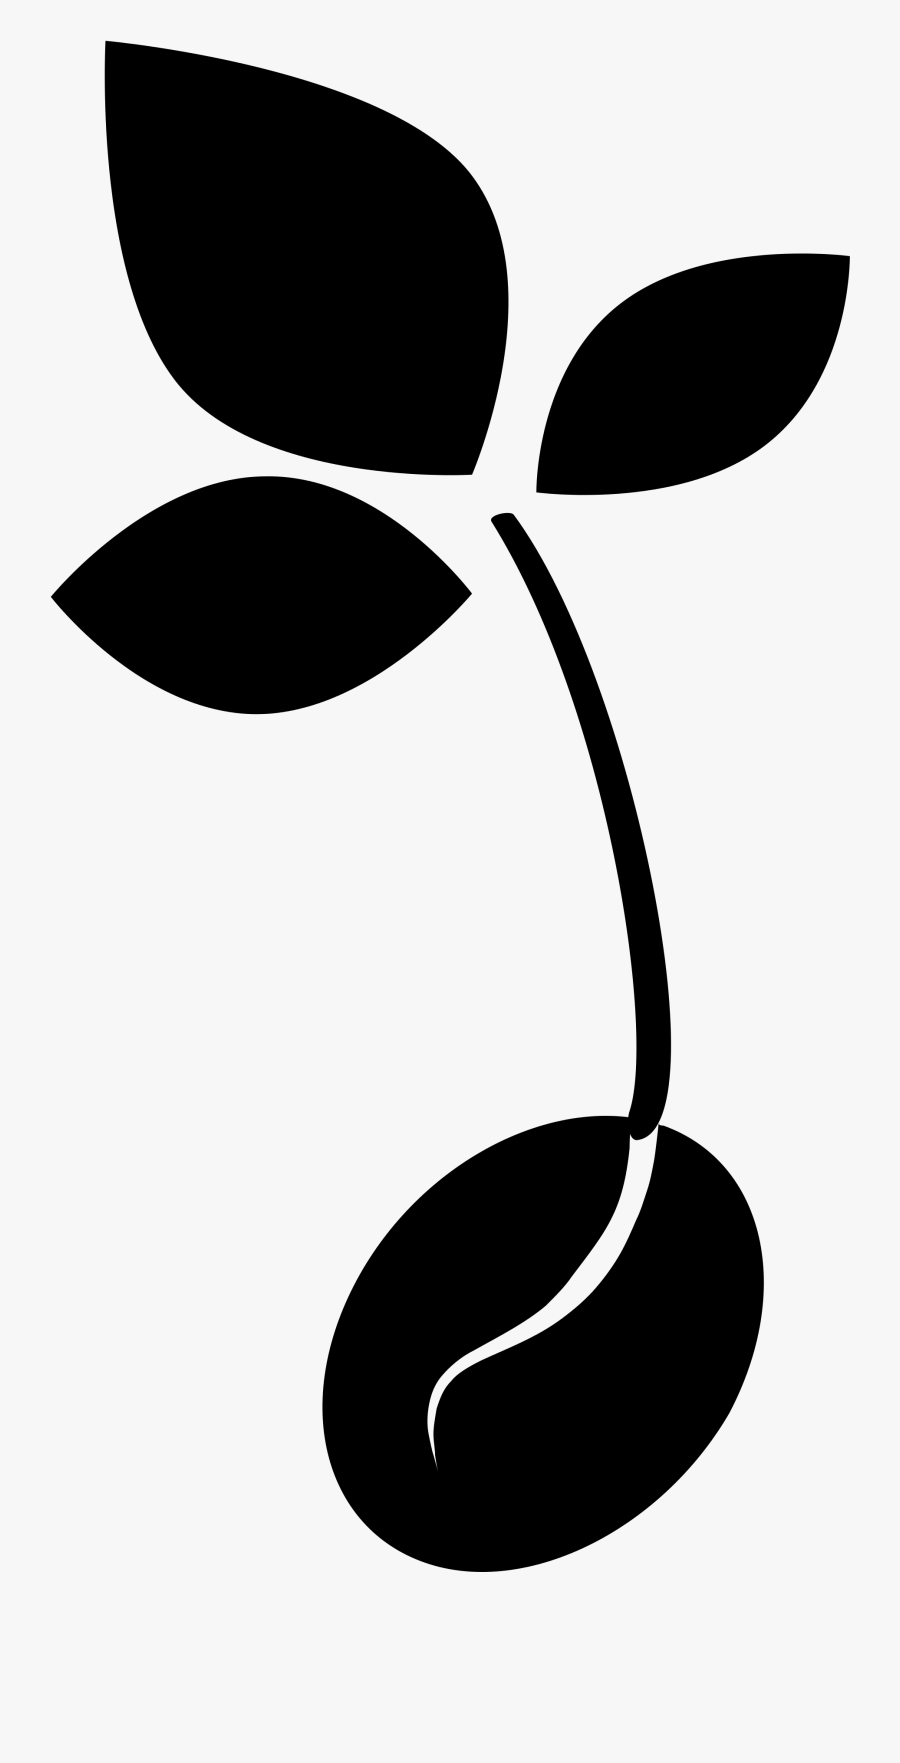 Transparent Plant Sprout Clipart - Seedling Black And White, Transparent Clipart